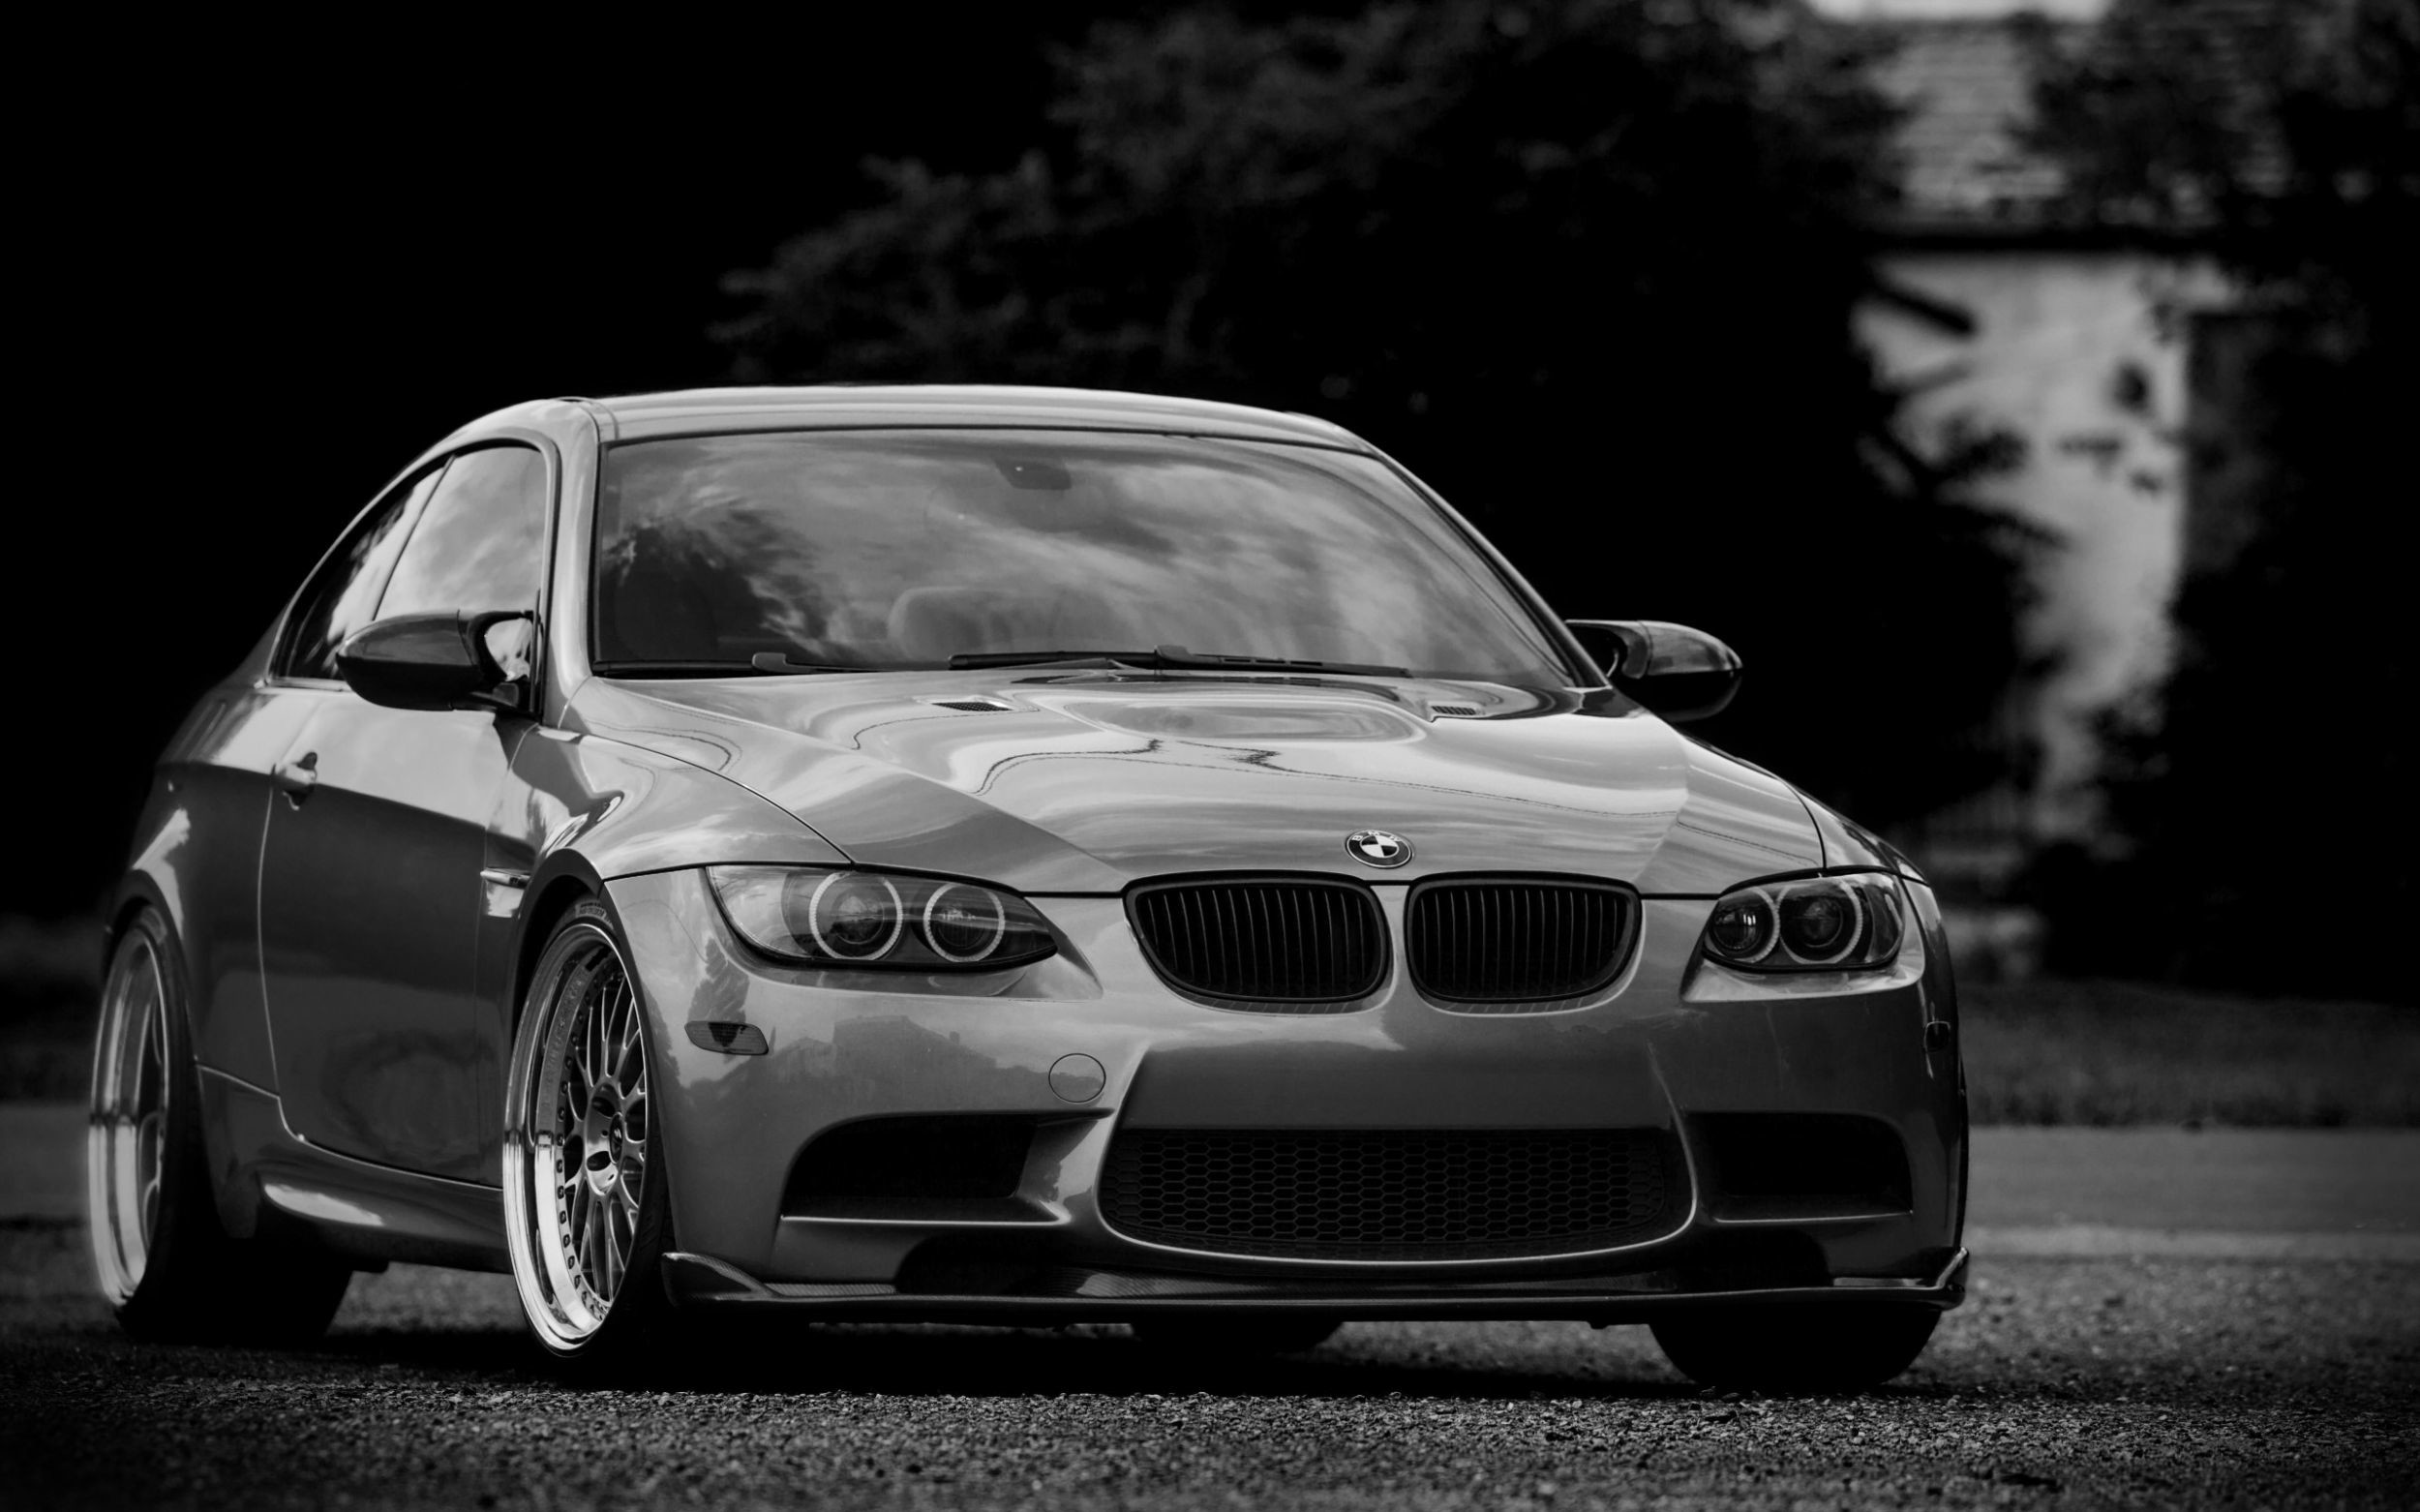 2500x1562 BMW M3 Wallpapers – BMW M3 Full HD Quality Wallpapers for mobile and desktop